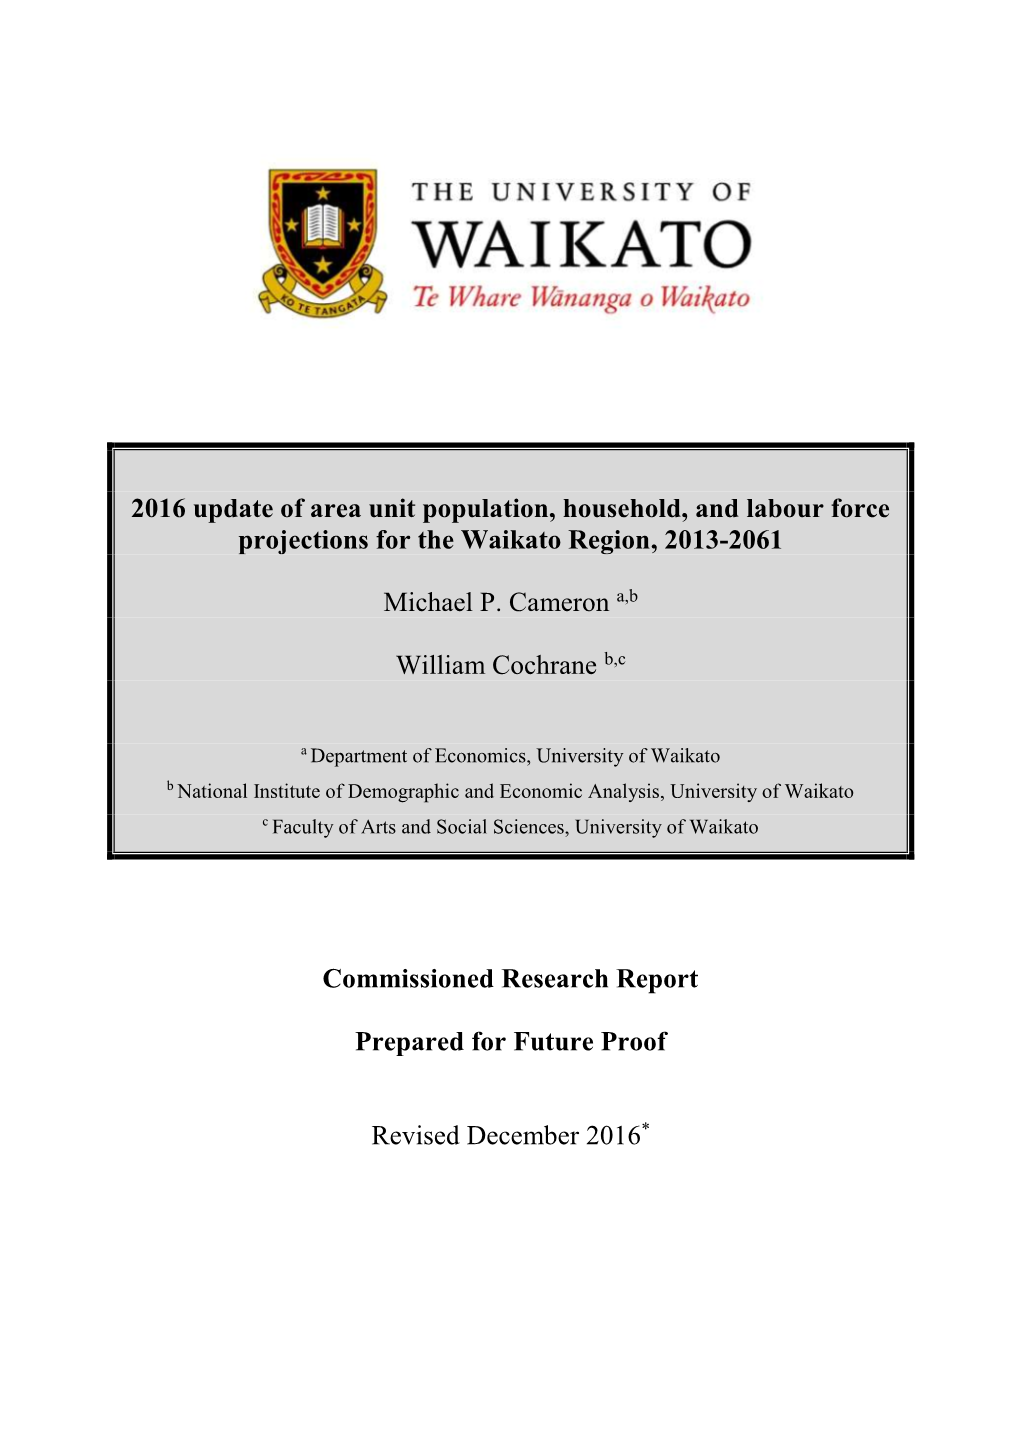 Population, Household & Labour Force Projections for Waikato Region